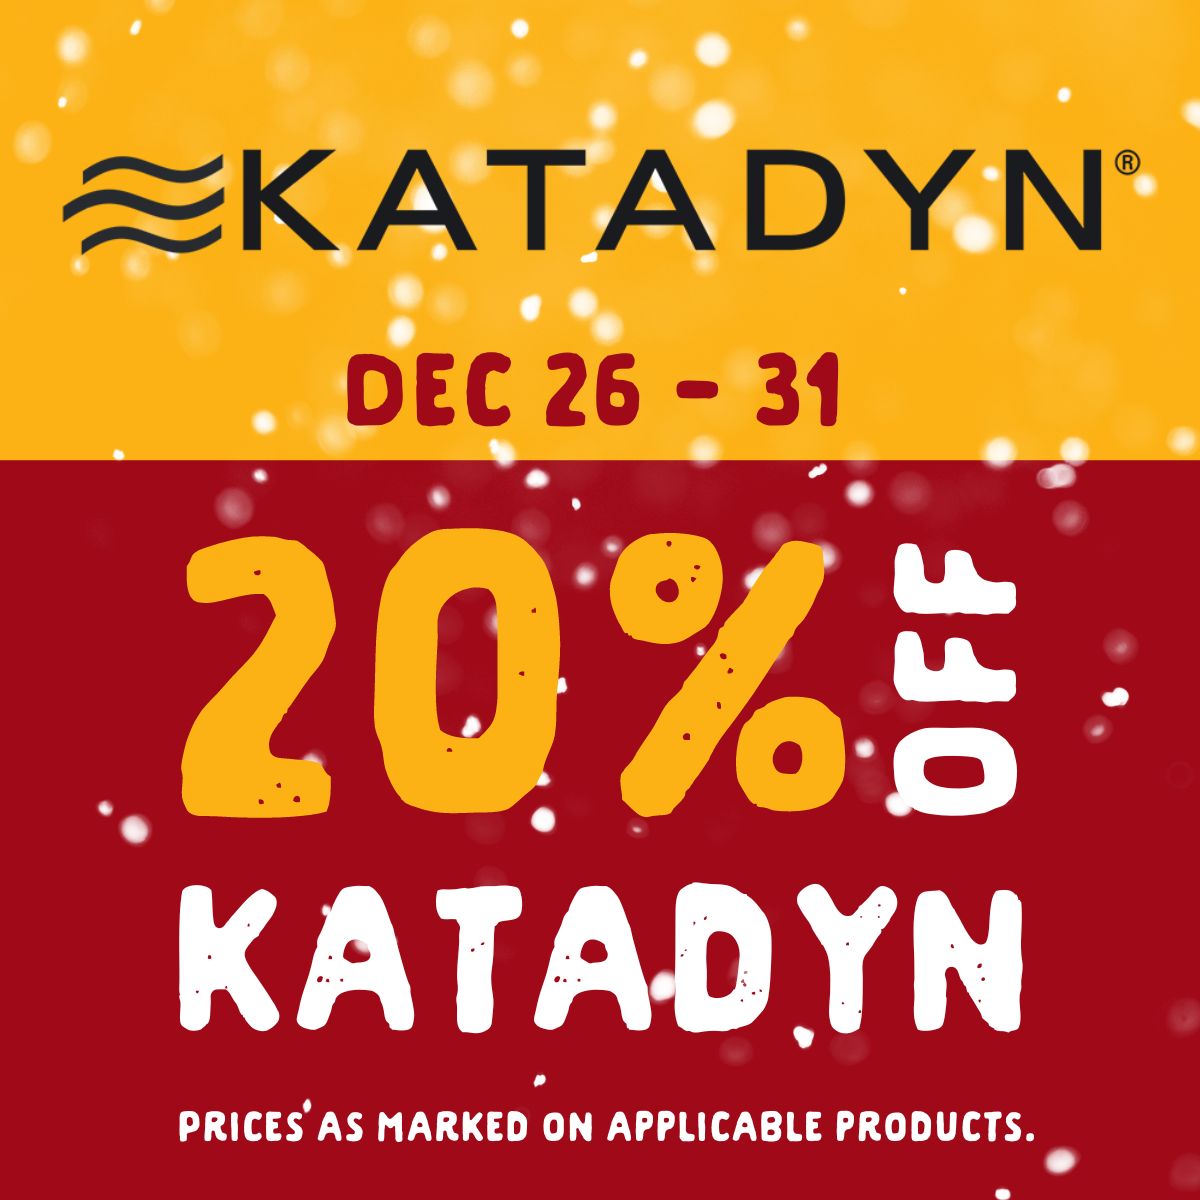 20% off Katadyn from December 26 to 31. Prices as marked on applicable products.